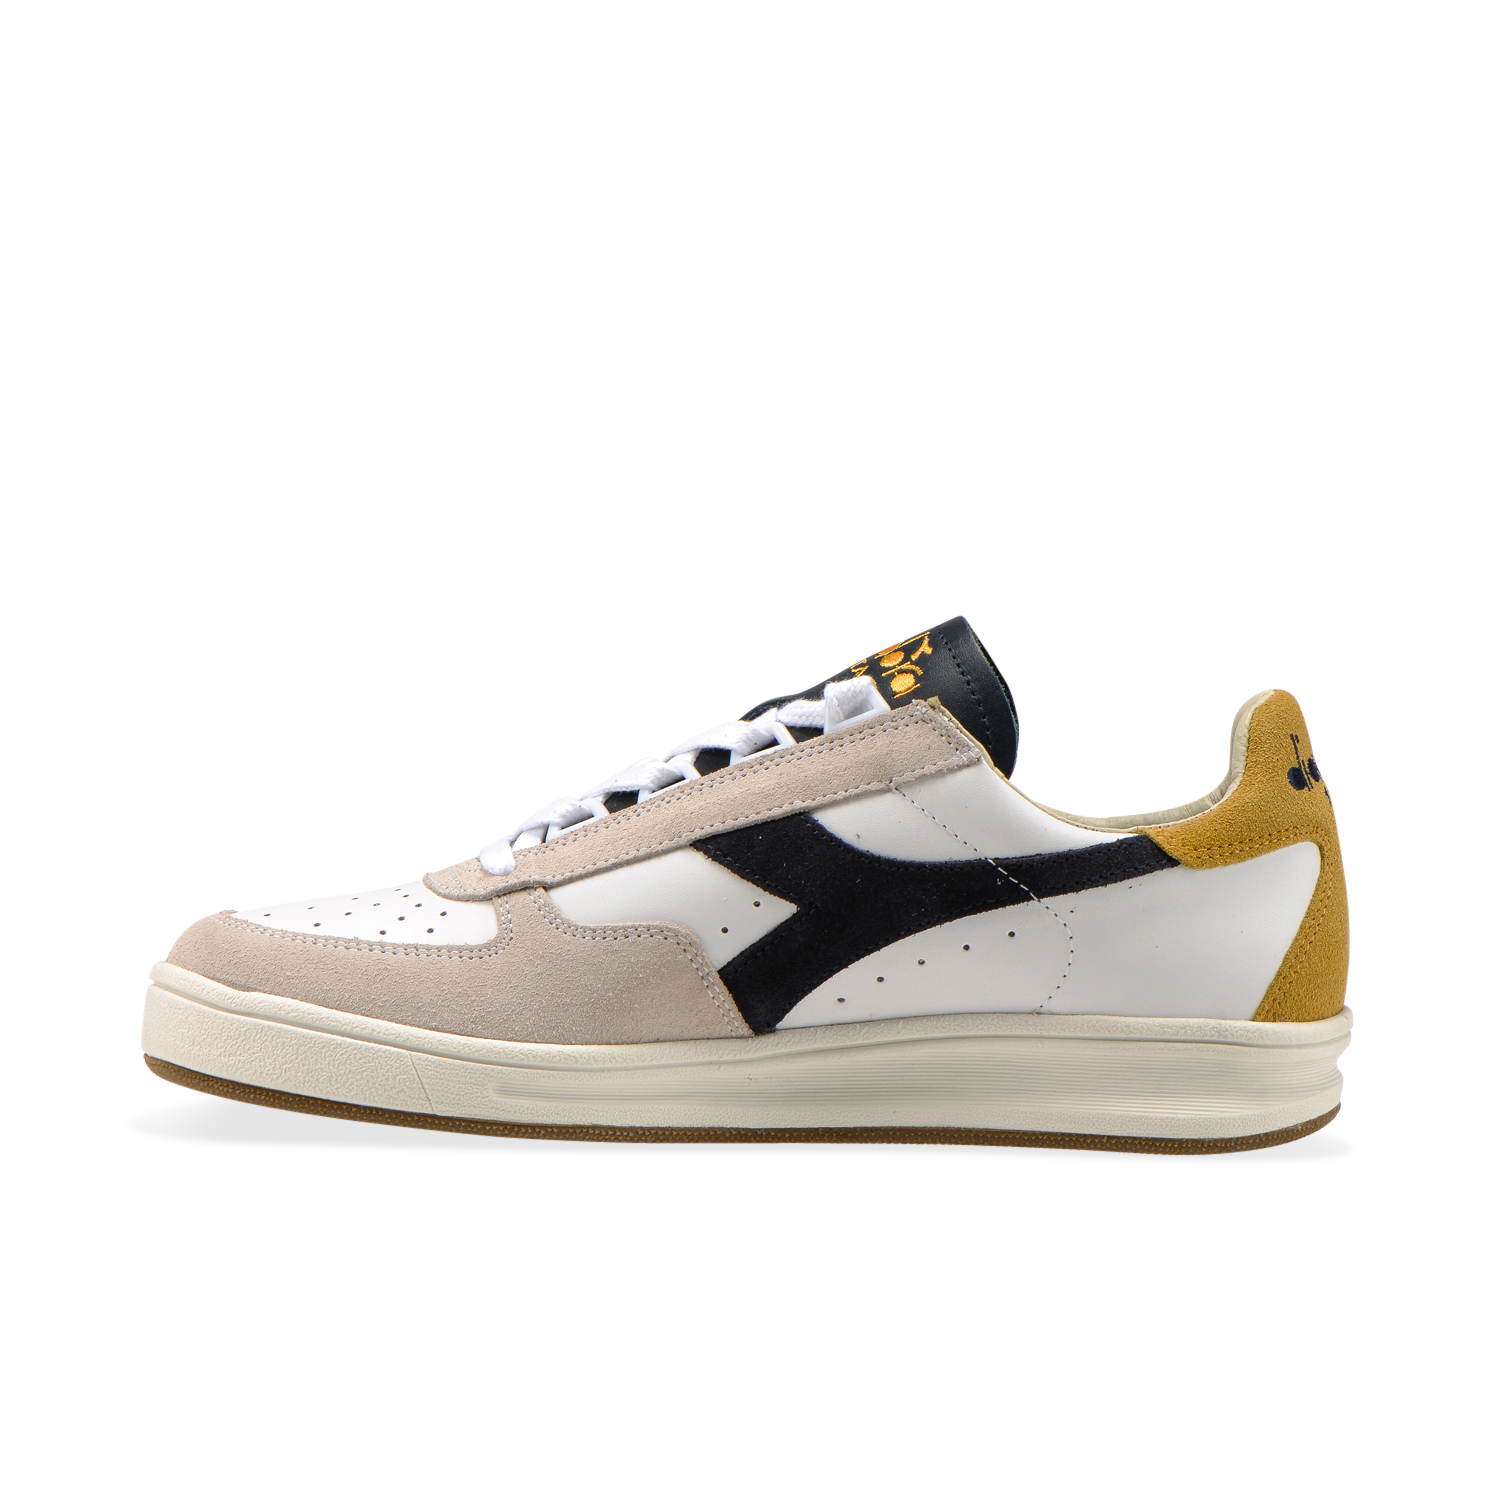 Diadora Heritage - Sneakers B.ELITE S L for man and woman | eBay